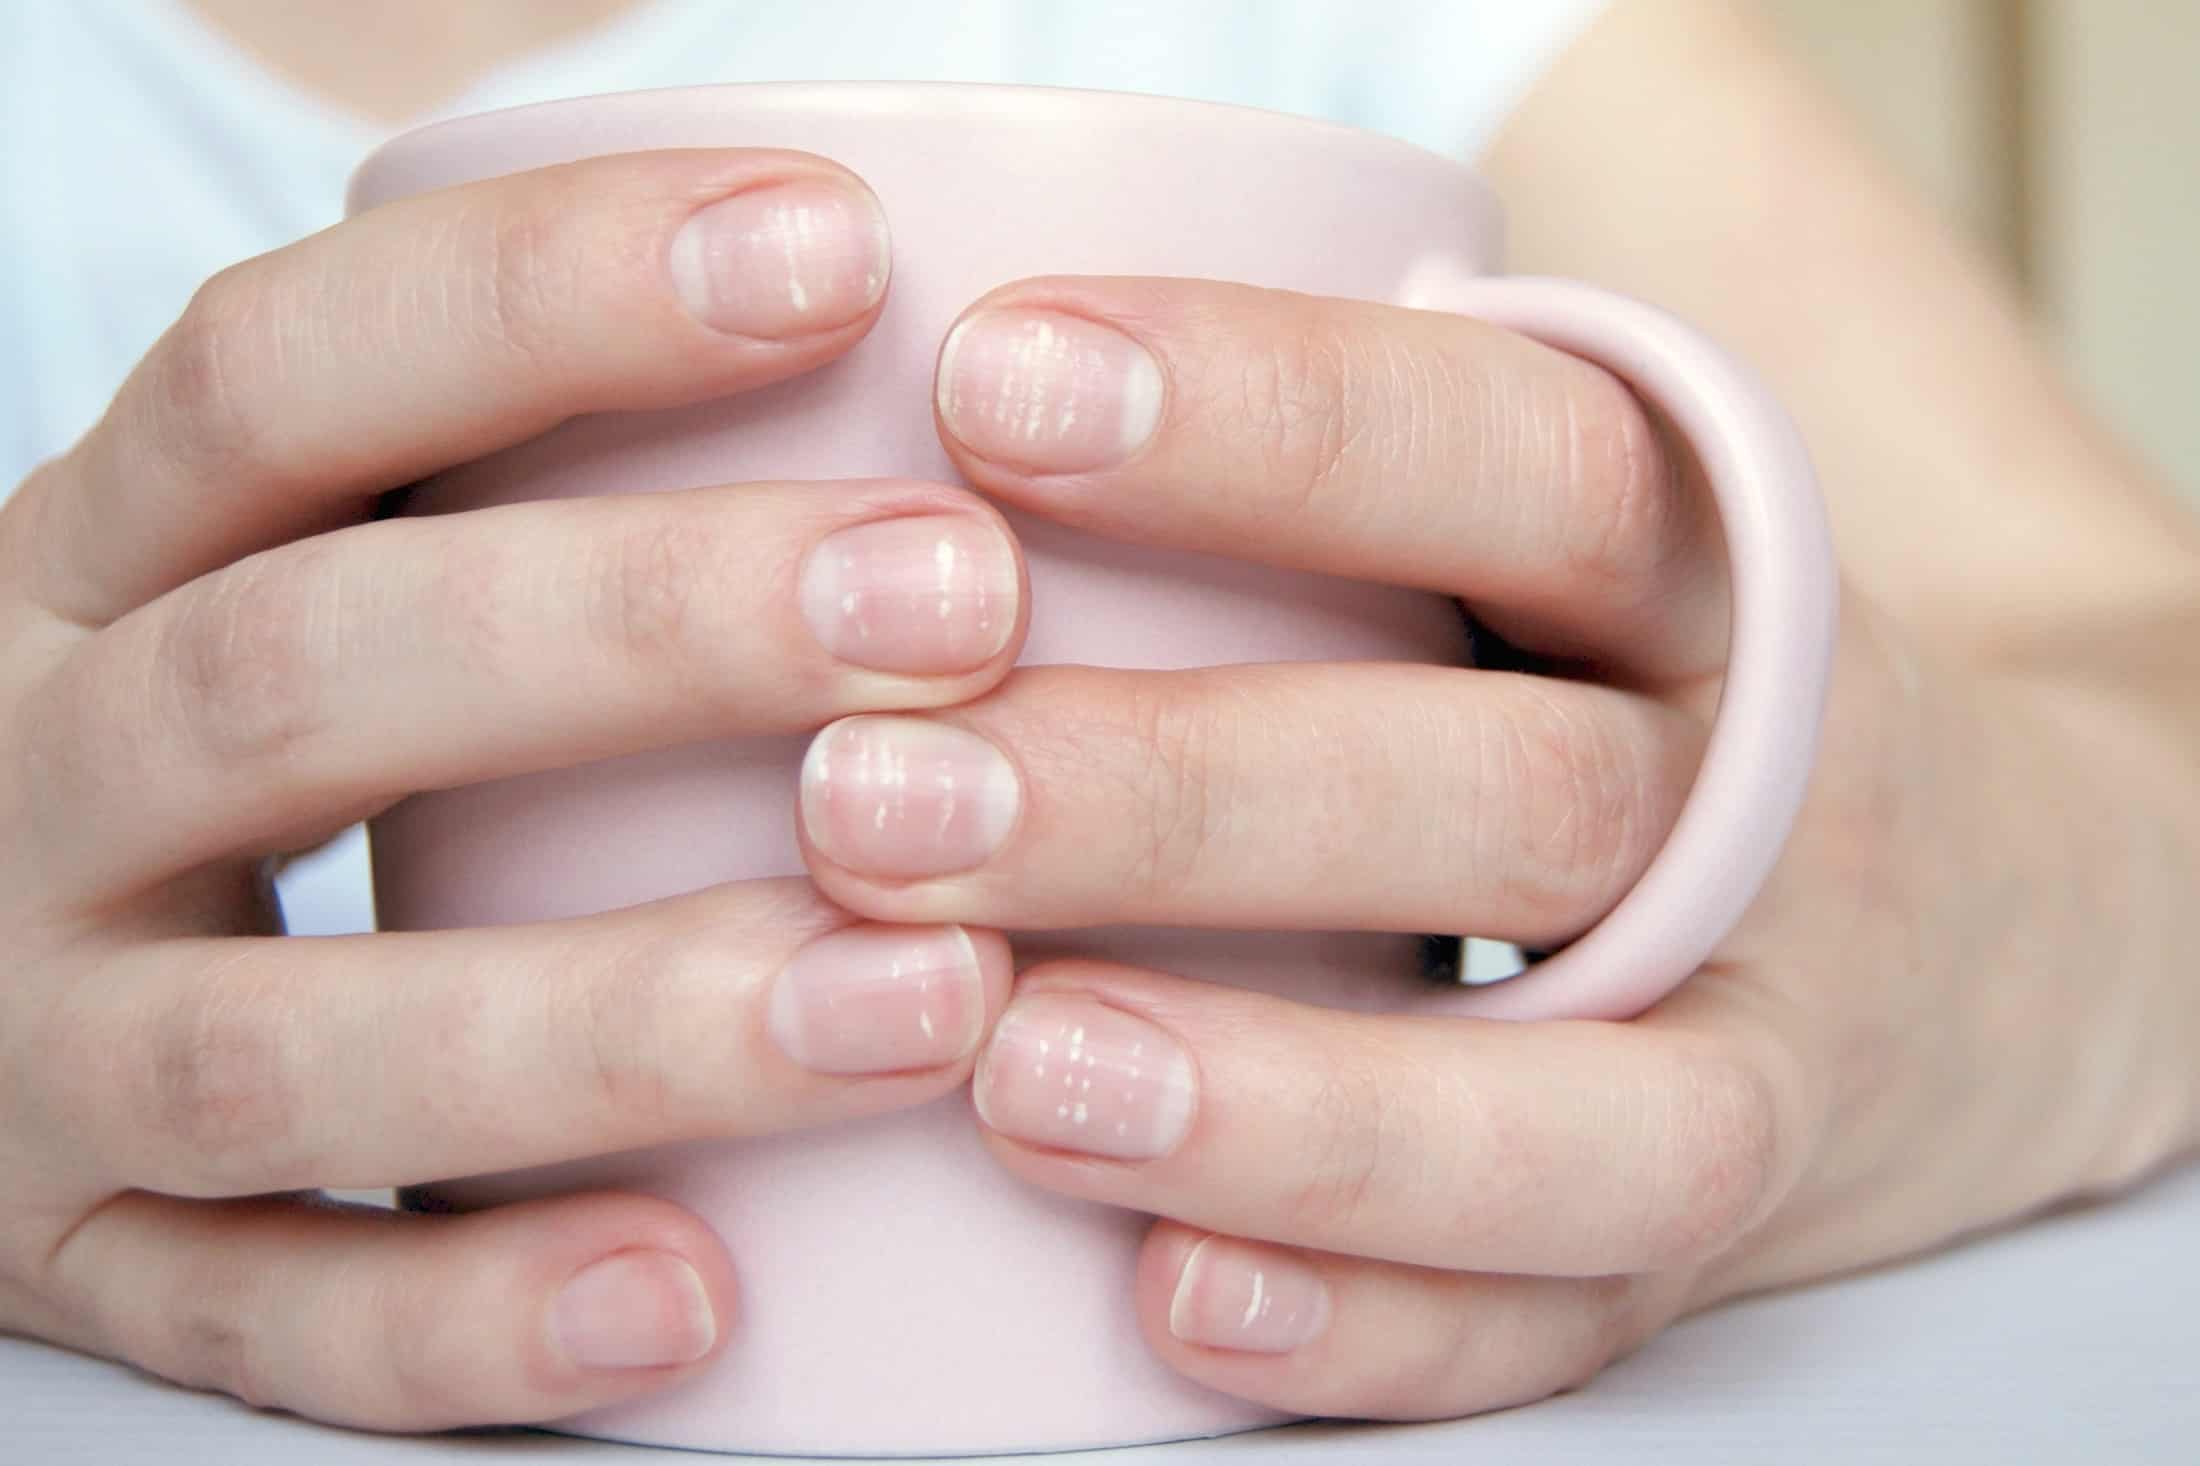 White spots on nails – is this a cause for concern?